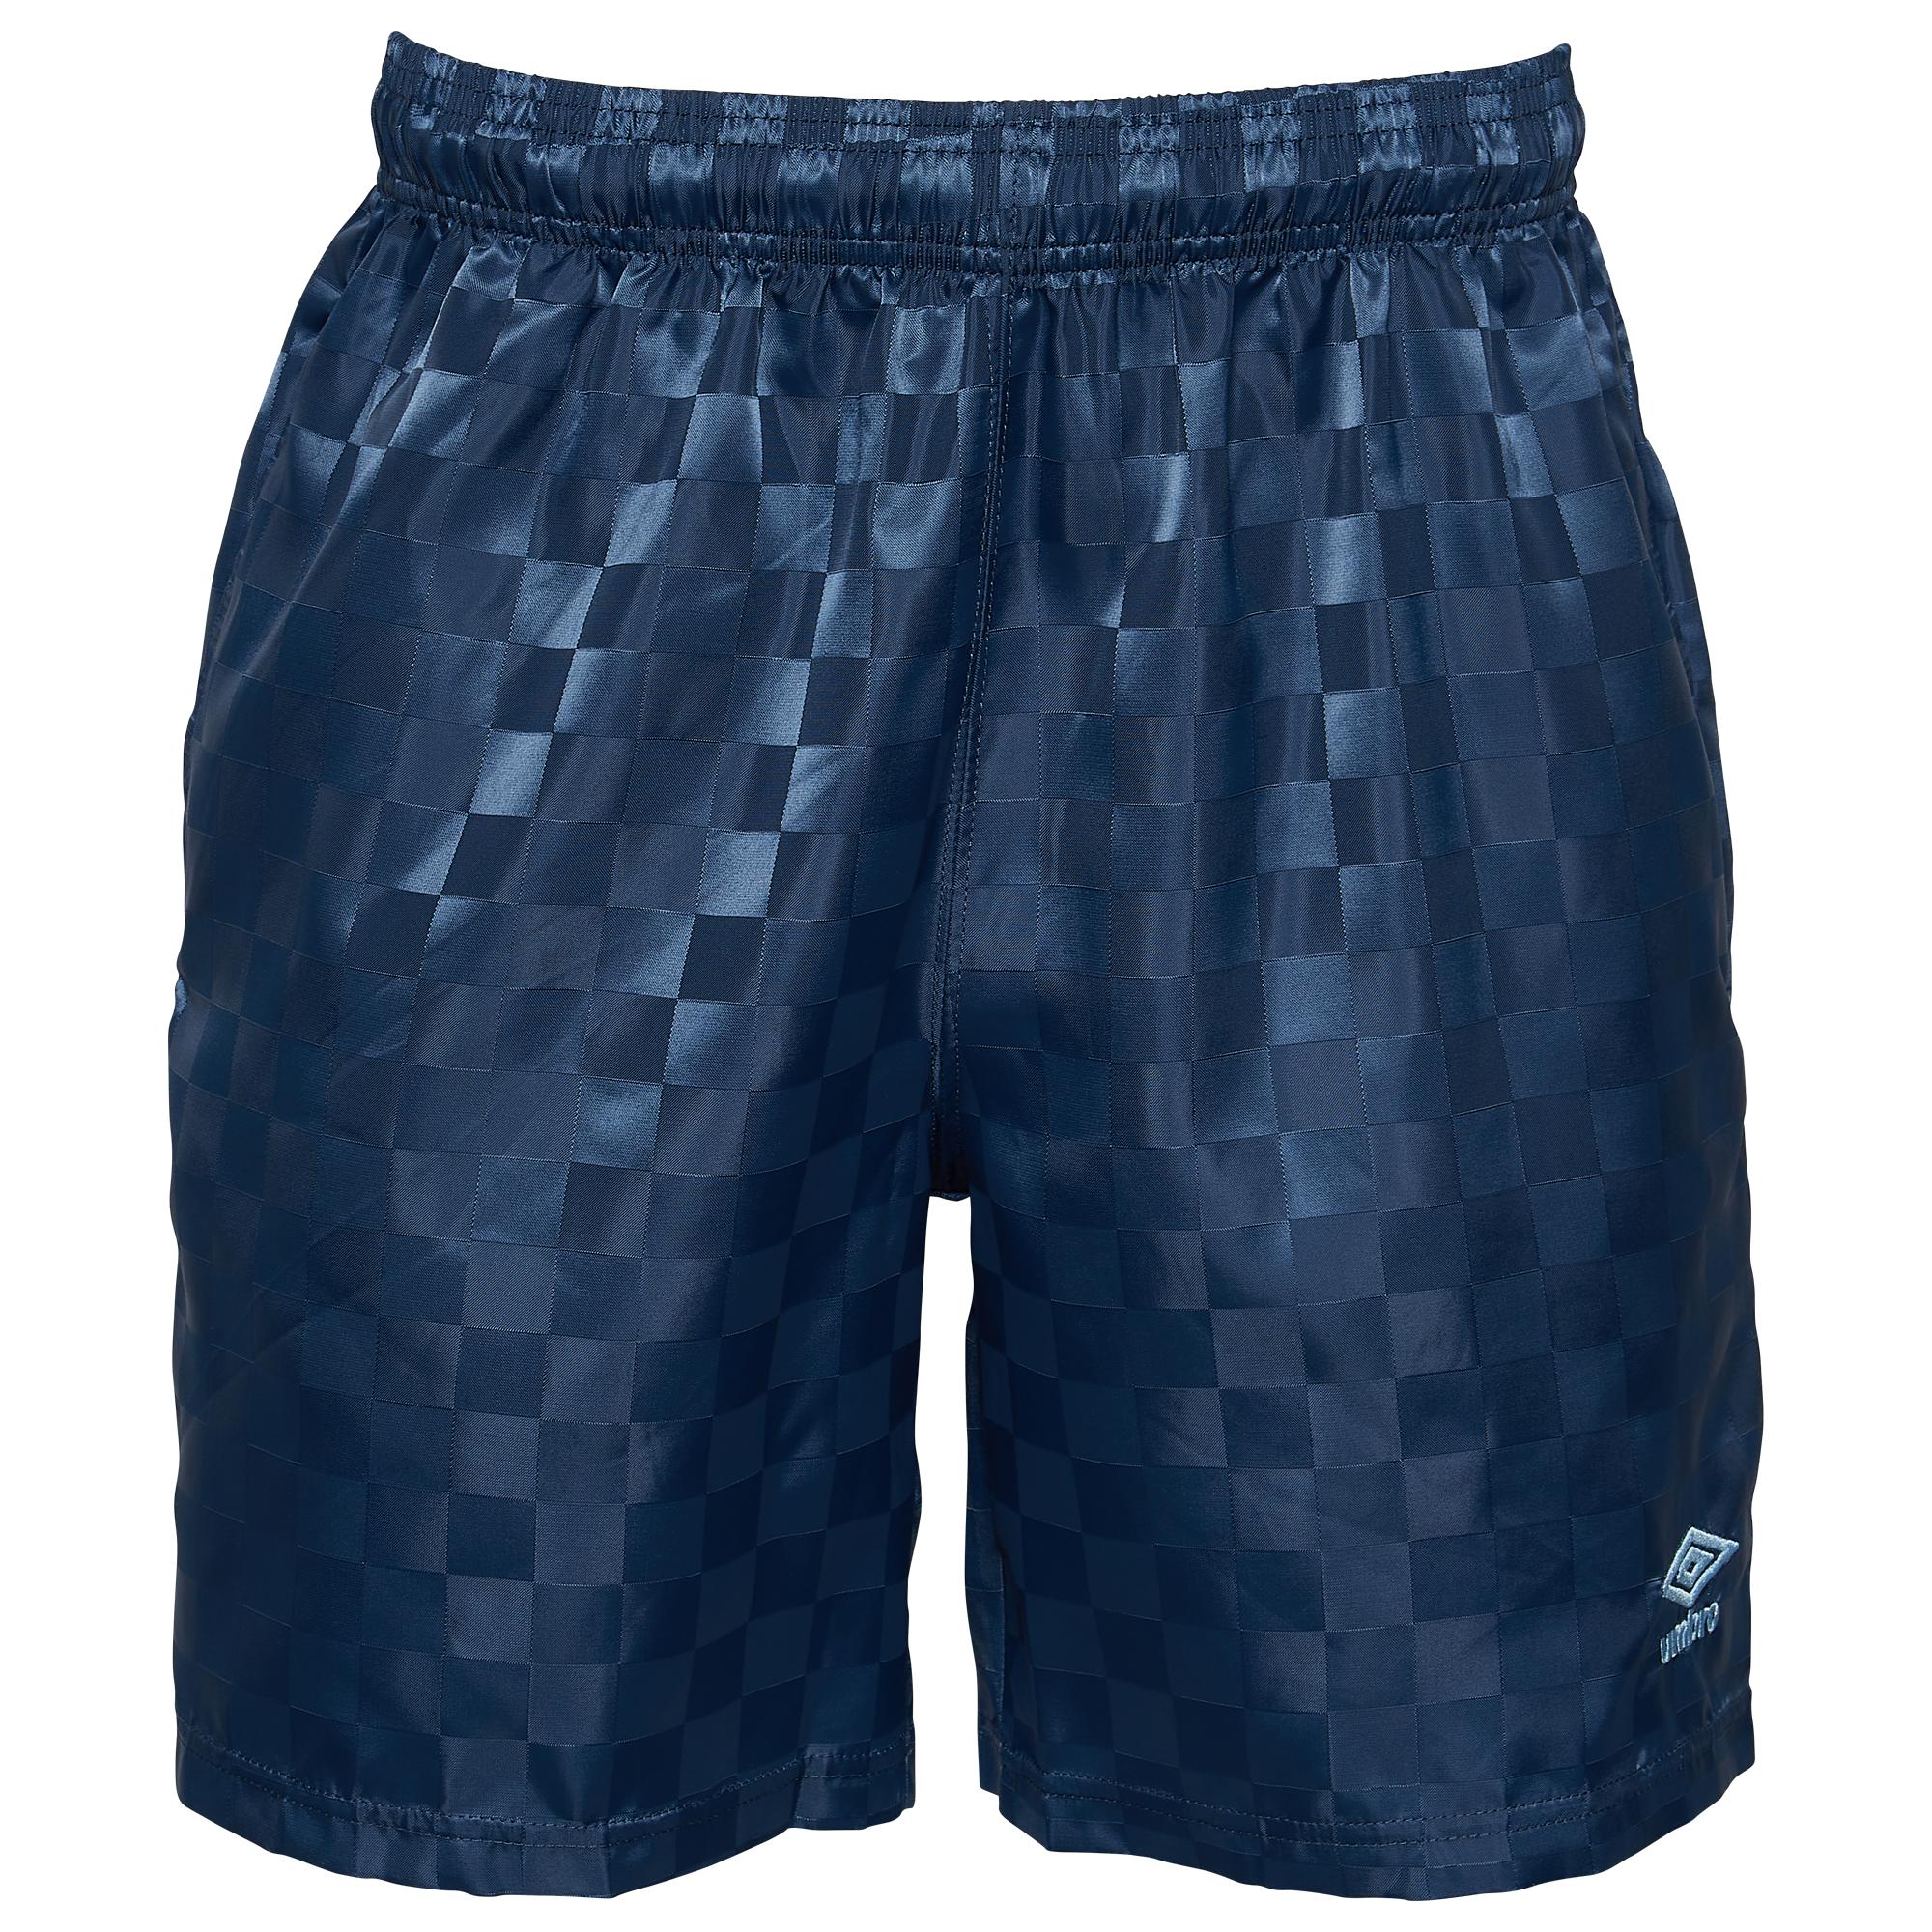 Umbro Synthetic Checkerboard Shorts in Blue for Men - Lyst